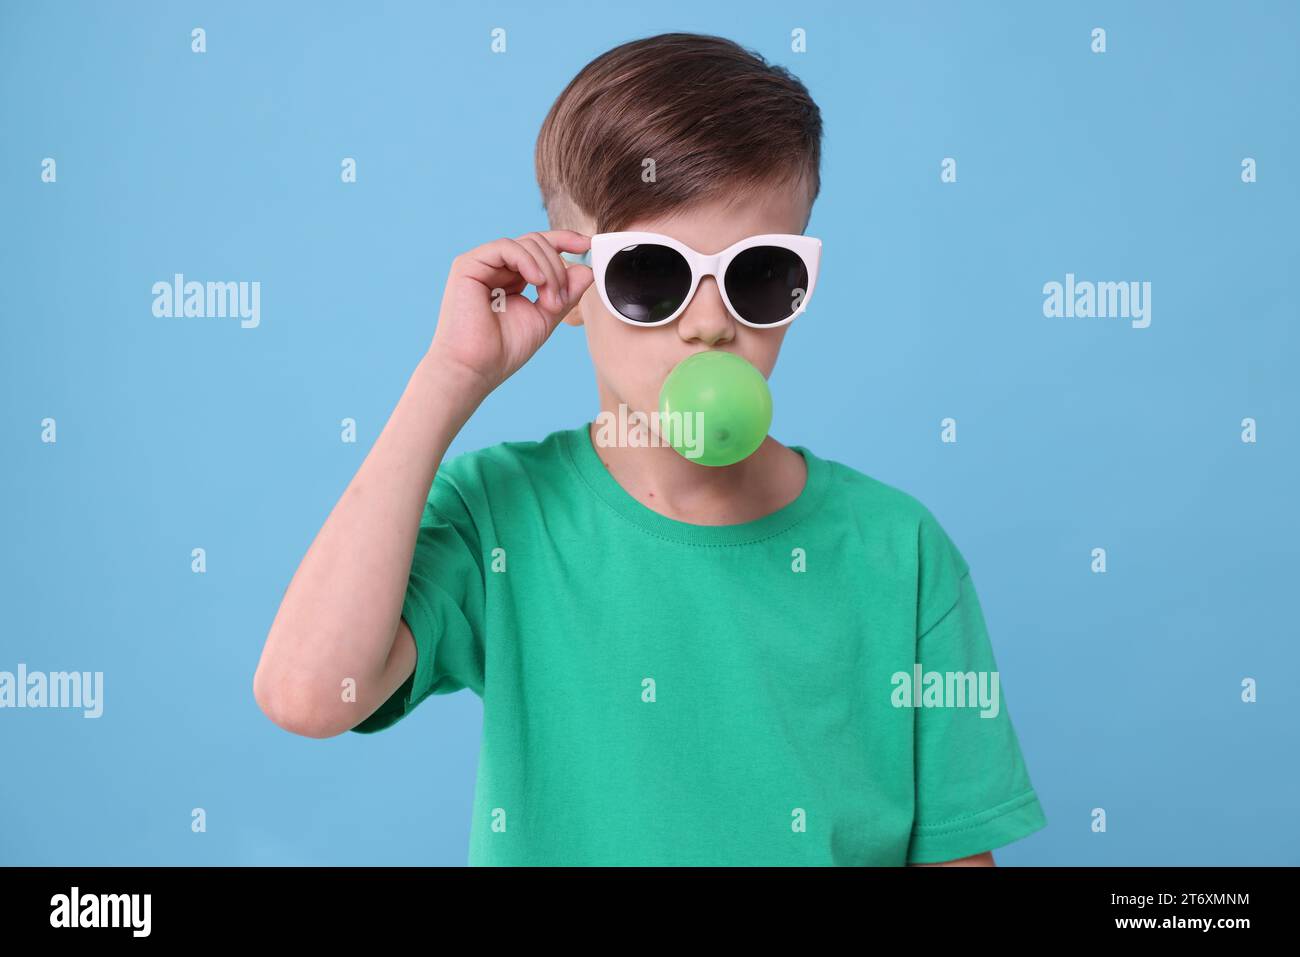 Boy in sunglasses blowing bubble gum on light blue background Stock ...